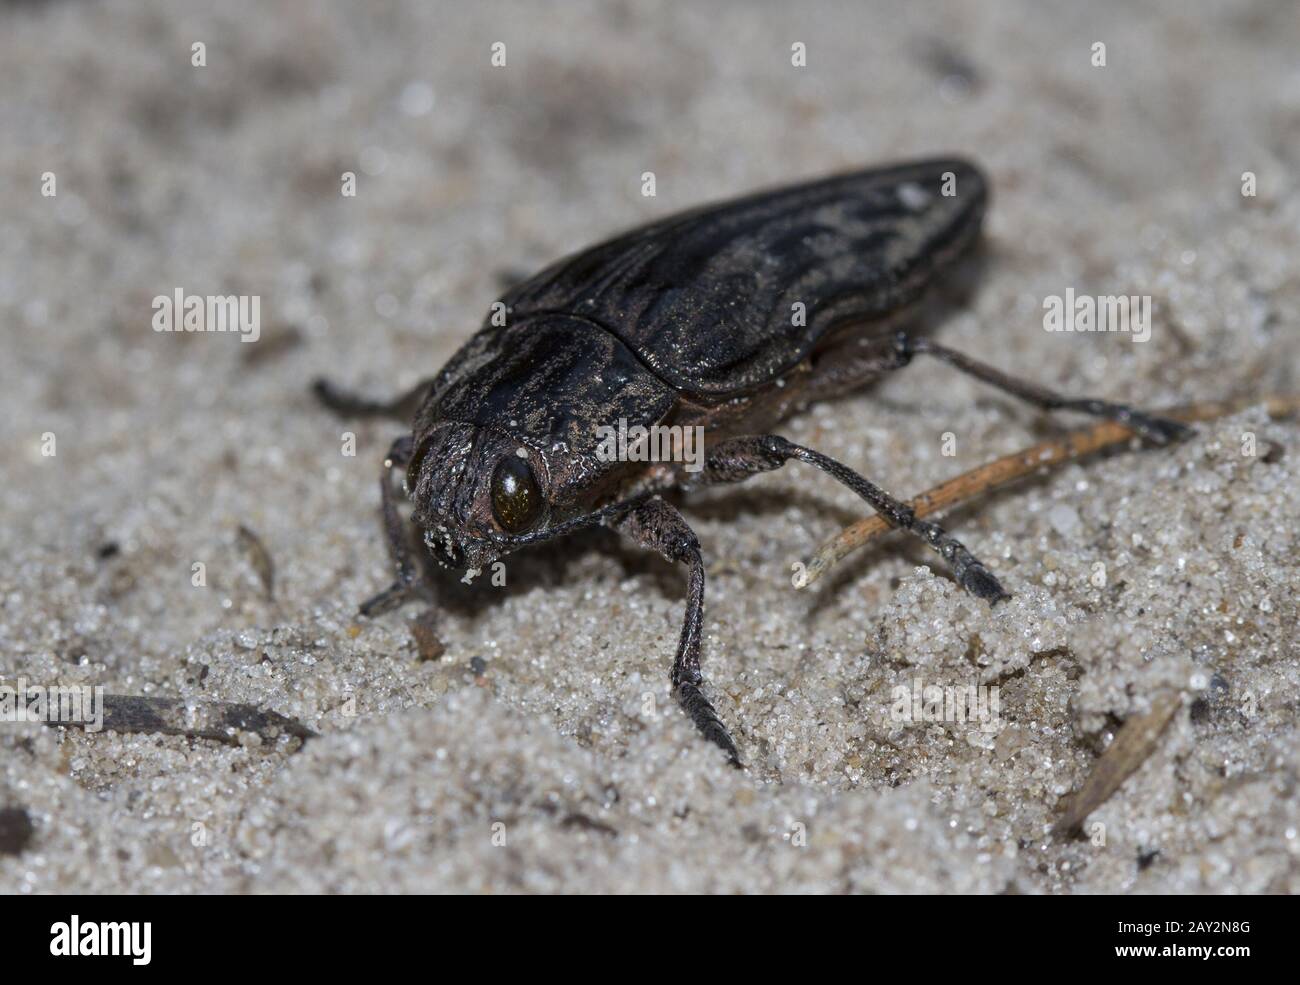 Buprestidae crawling on Pessoa in a pine forest. Stock Photo